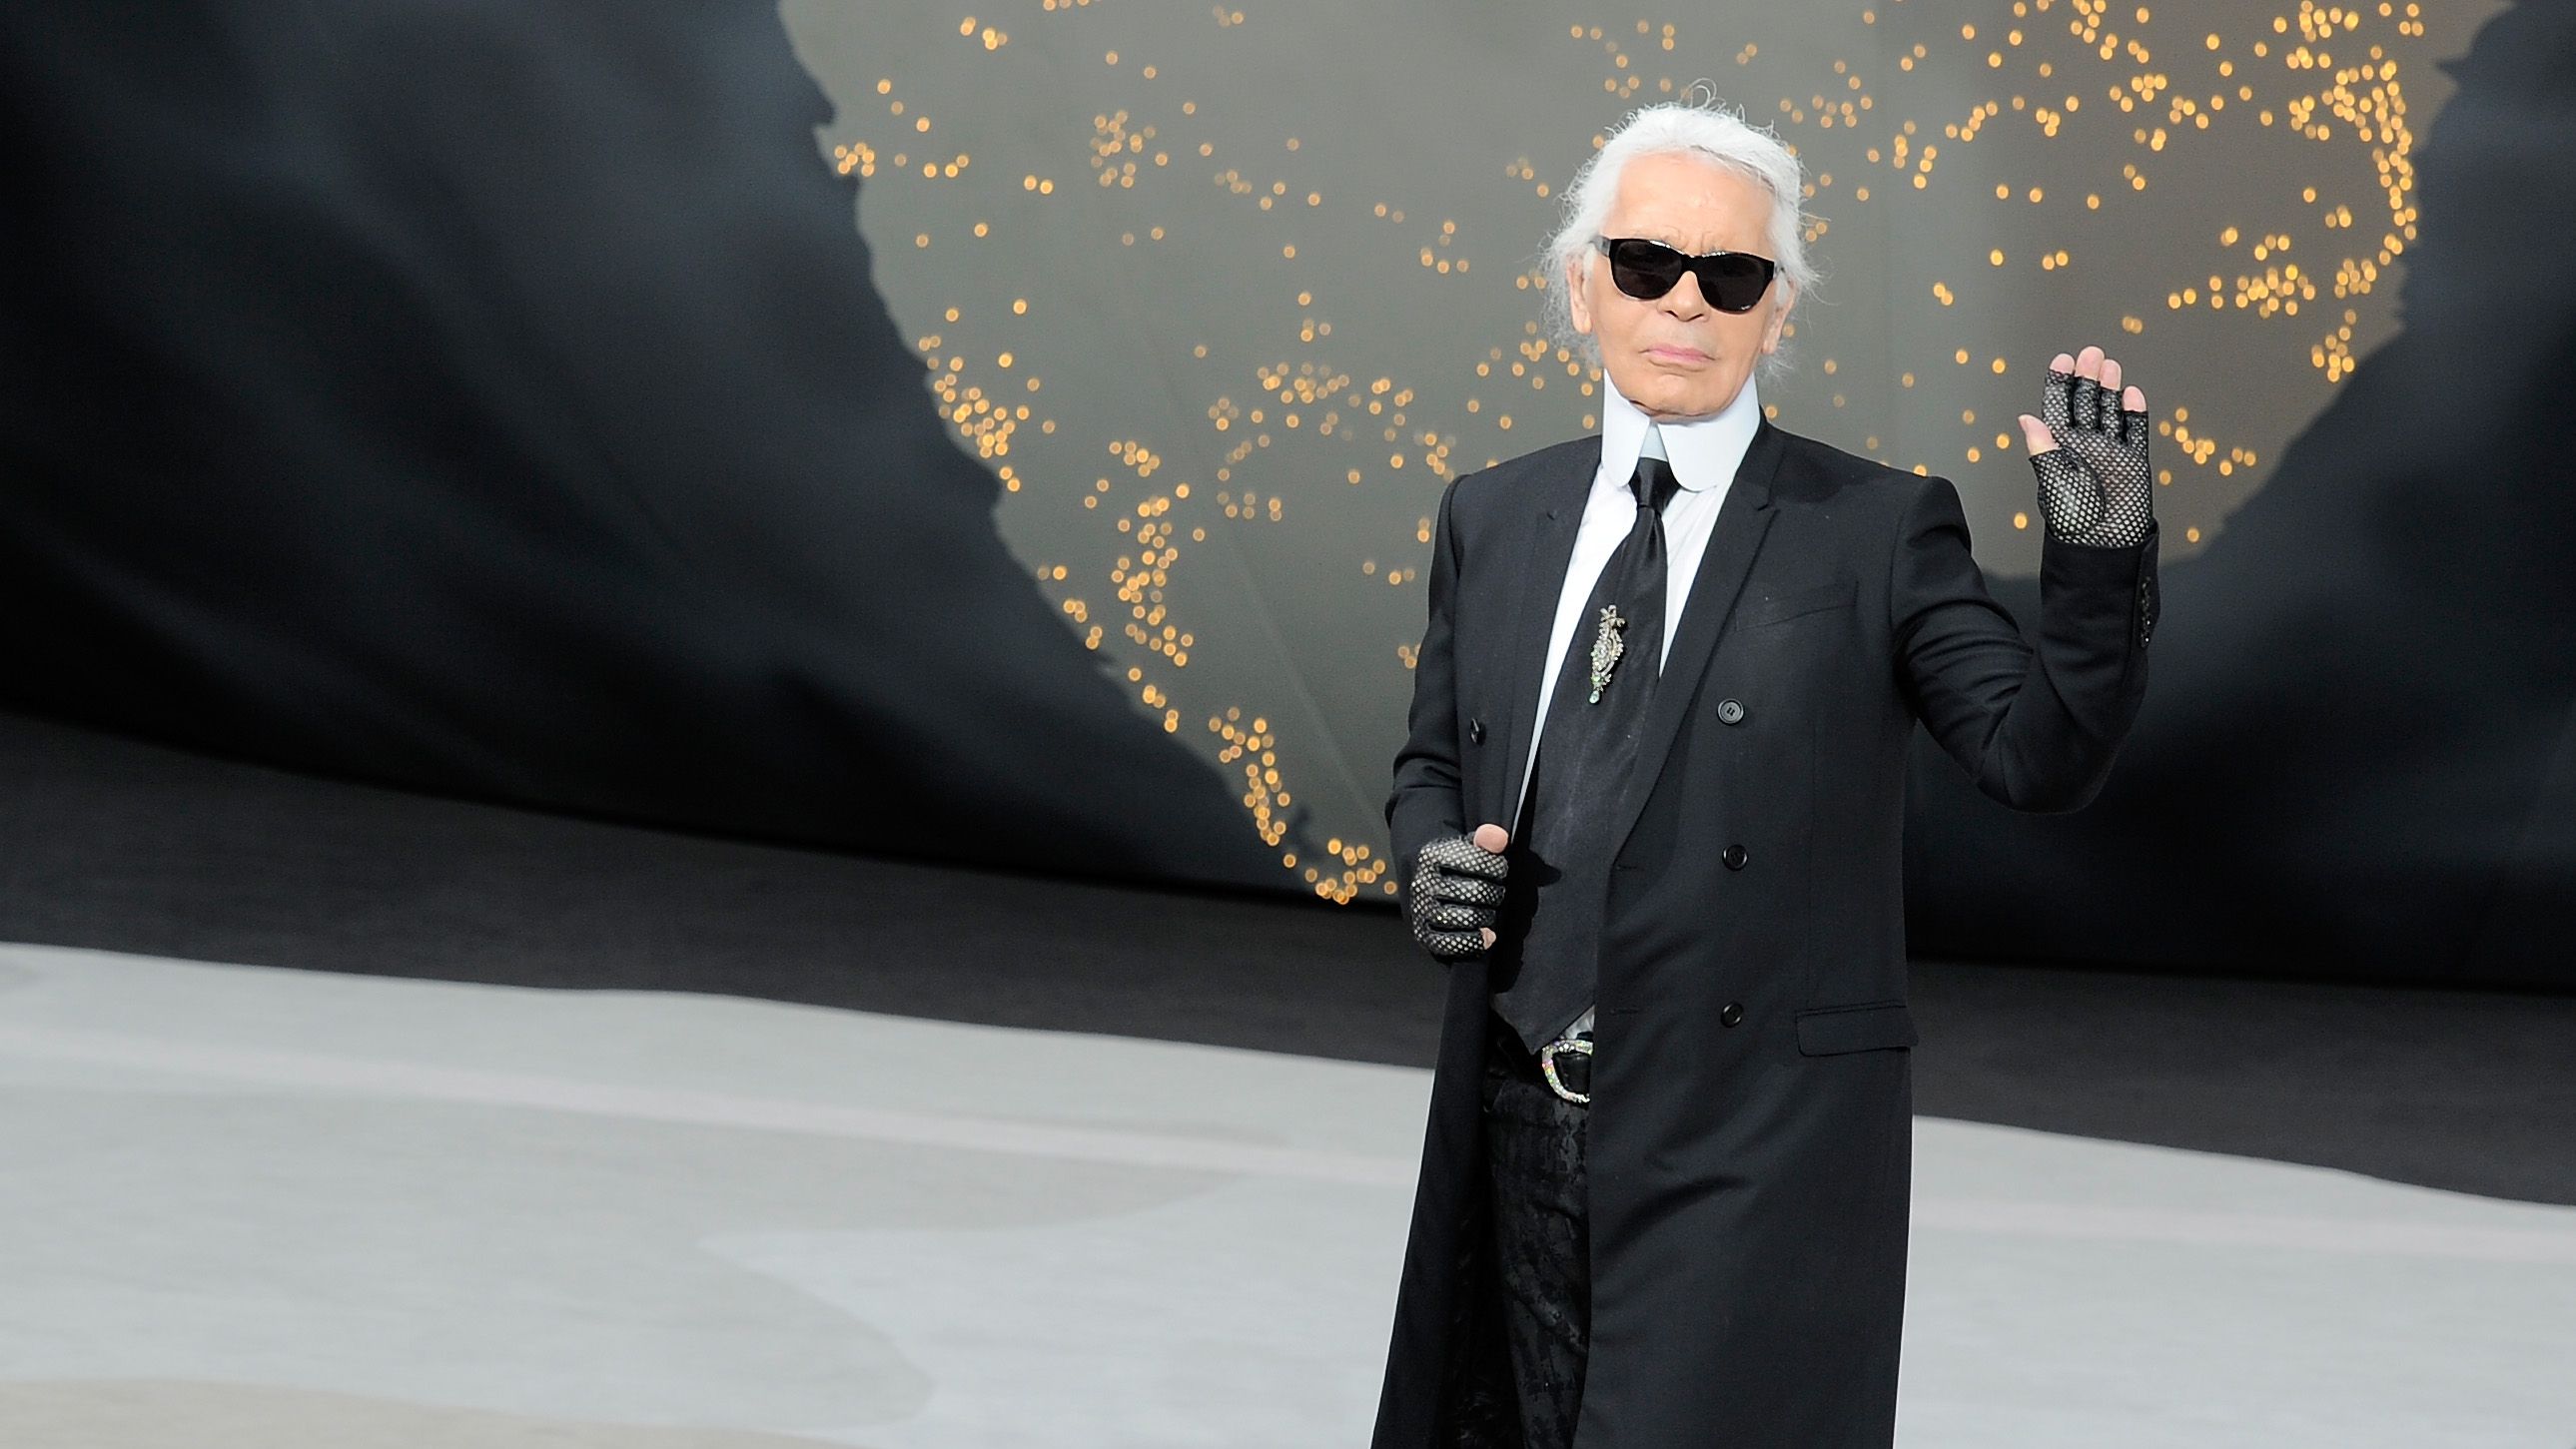 Met Gala 2023 theme revealed: A tribute to late Karl Lagerfeld